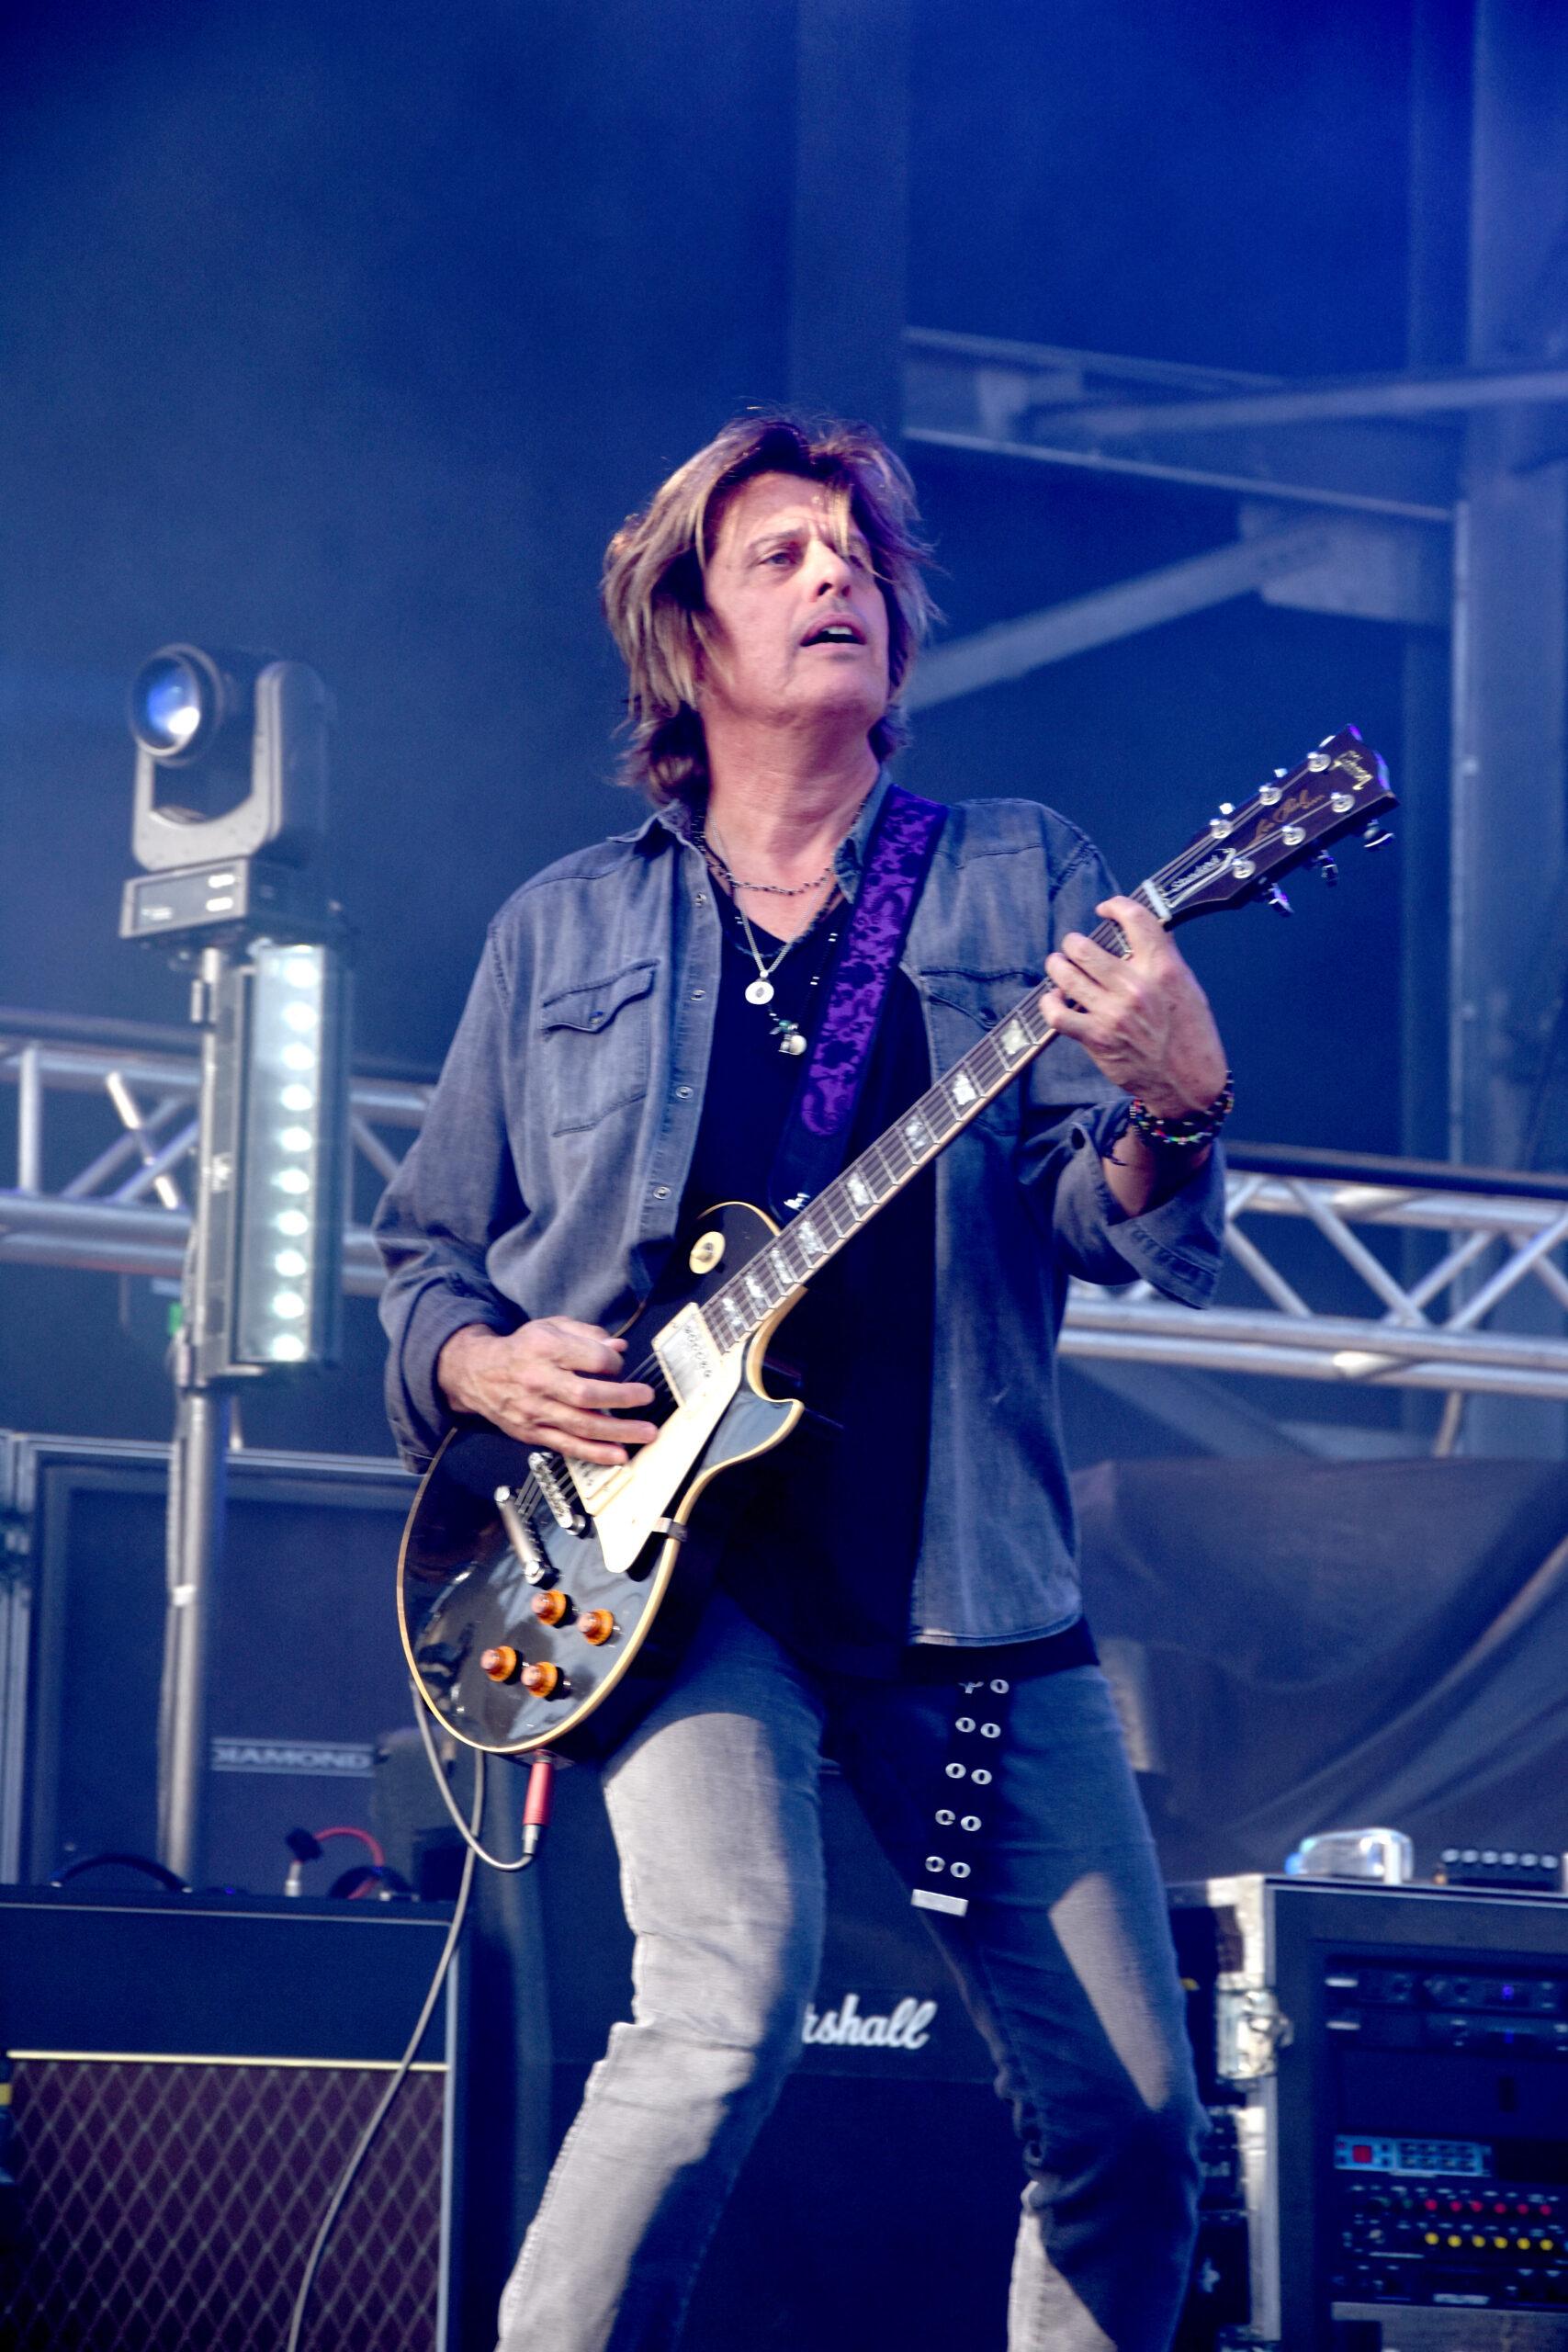 Dean DeLeo performing at Rock on the Range 2018 - Day 3